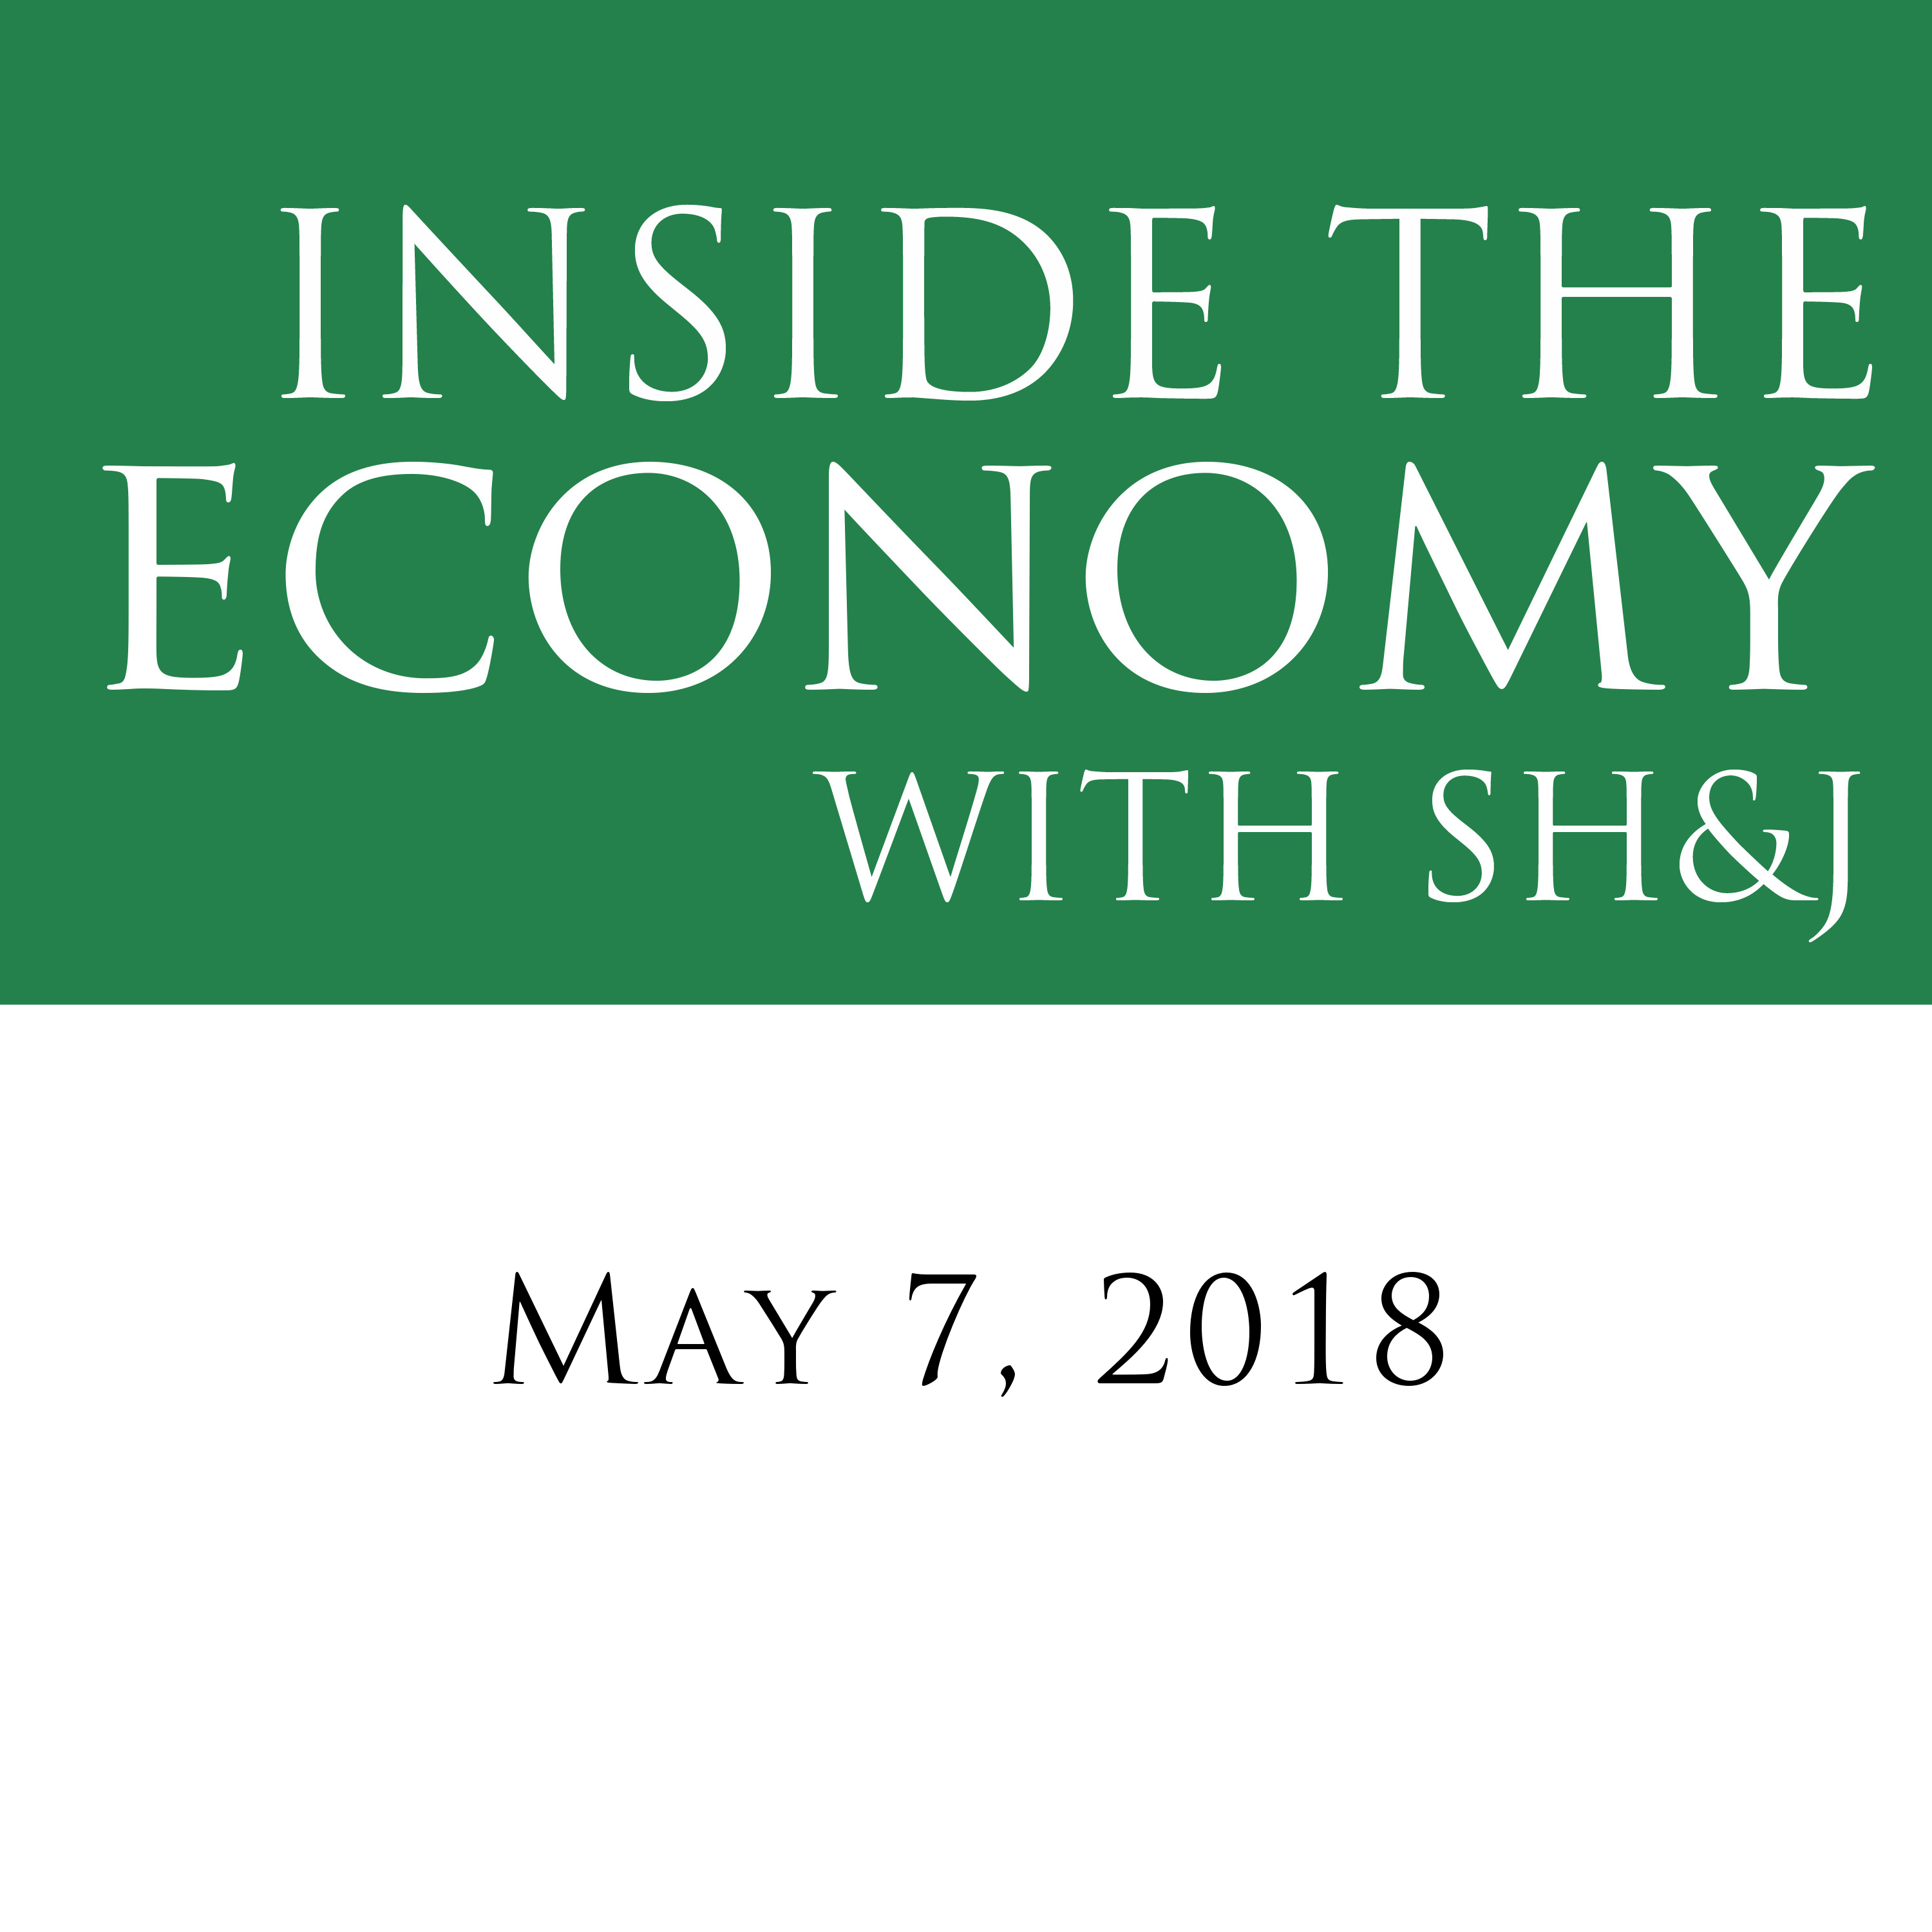 Inside the Economy w/ SH&J: Detroit and Rare Earth Elements